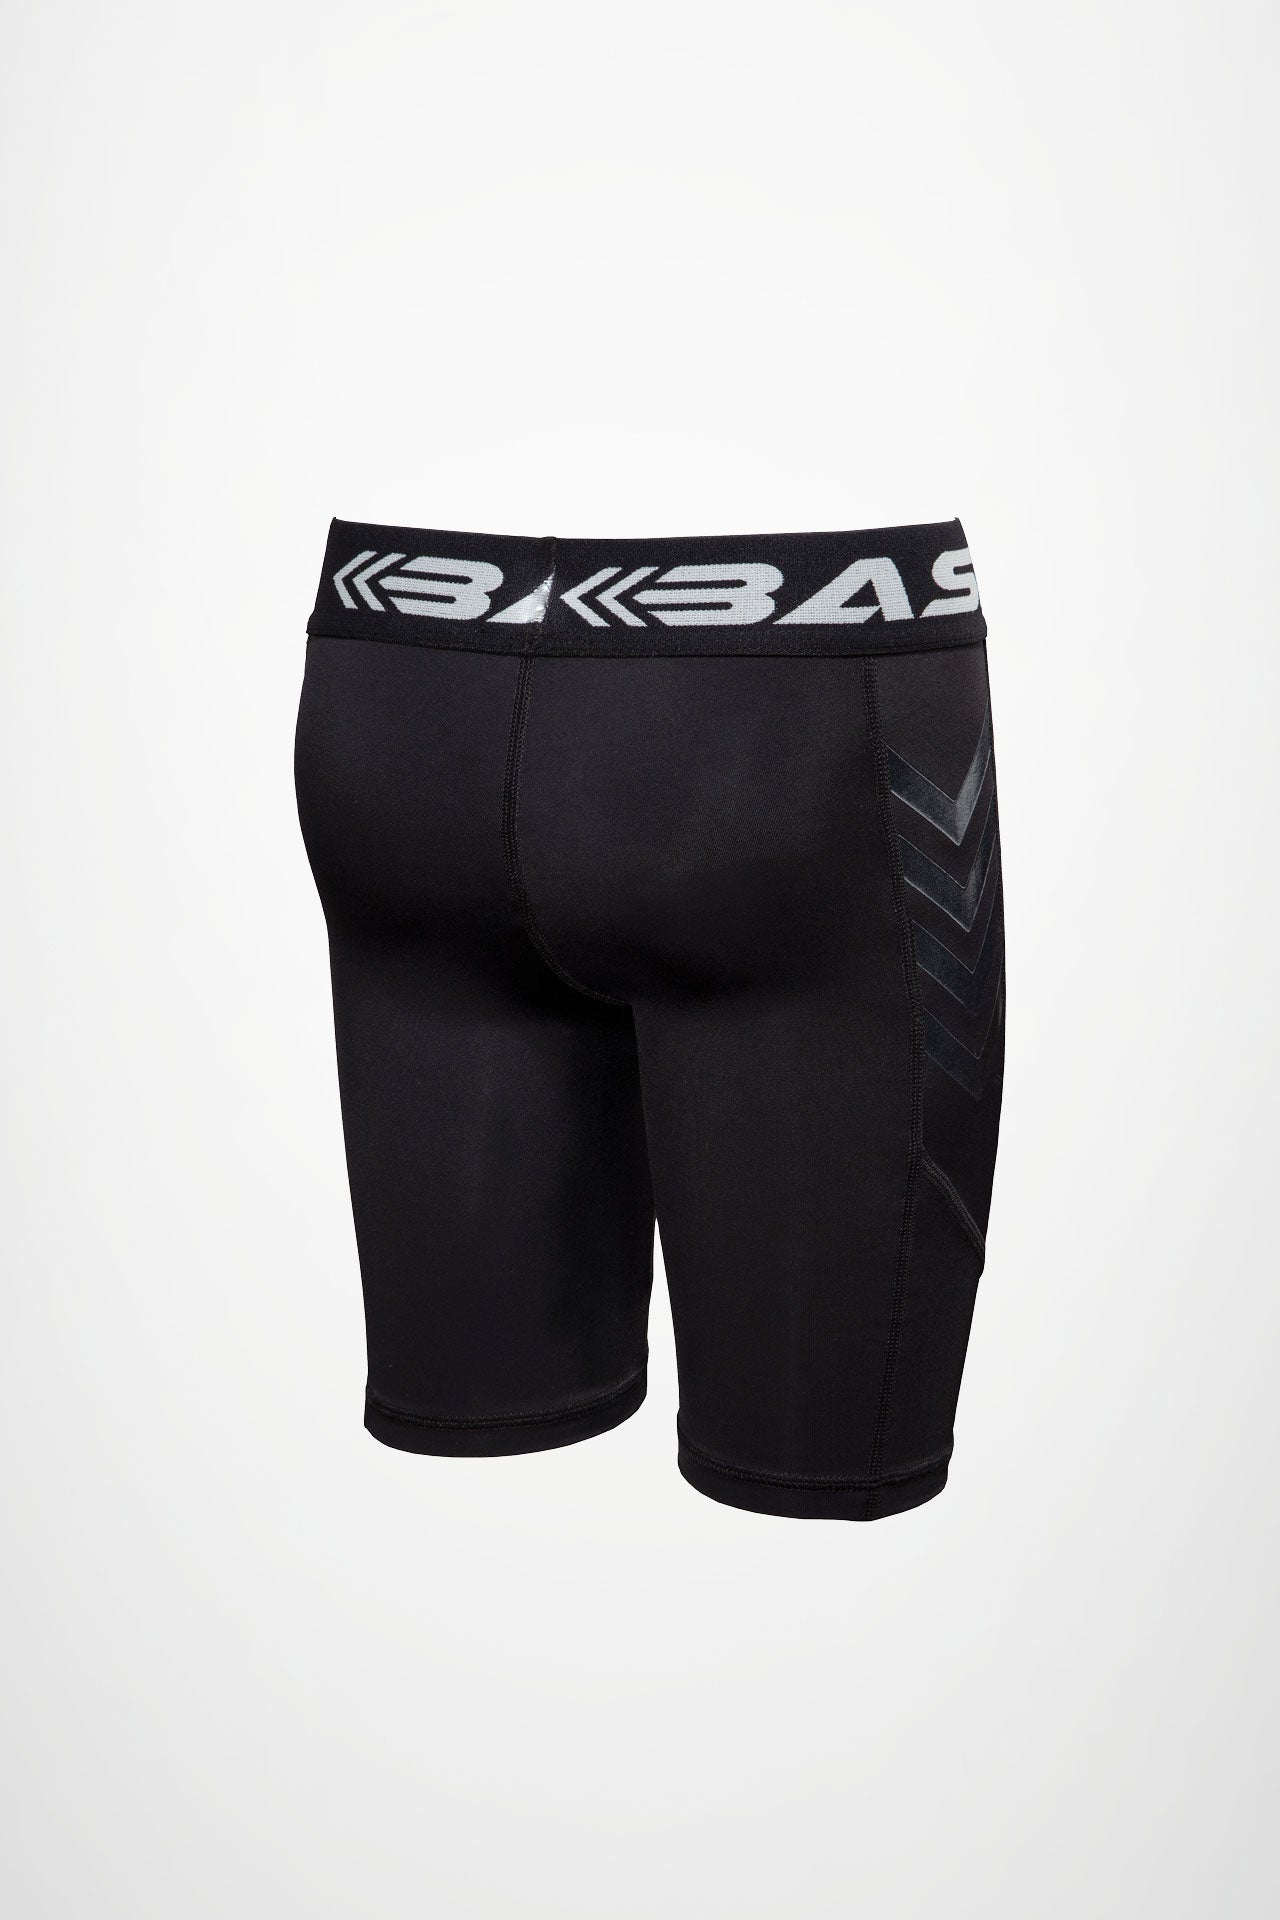 Youth Size USA Classic Compression Short | Unpadded Black Spandex Shorts  for Kids